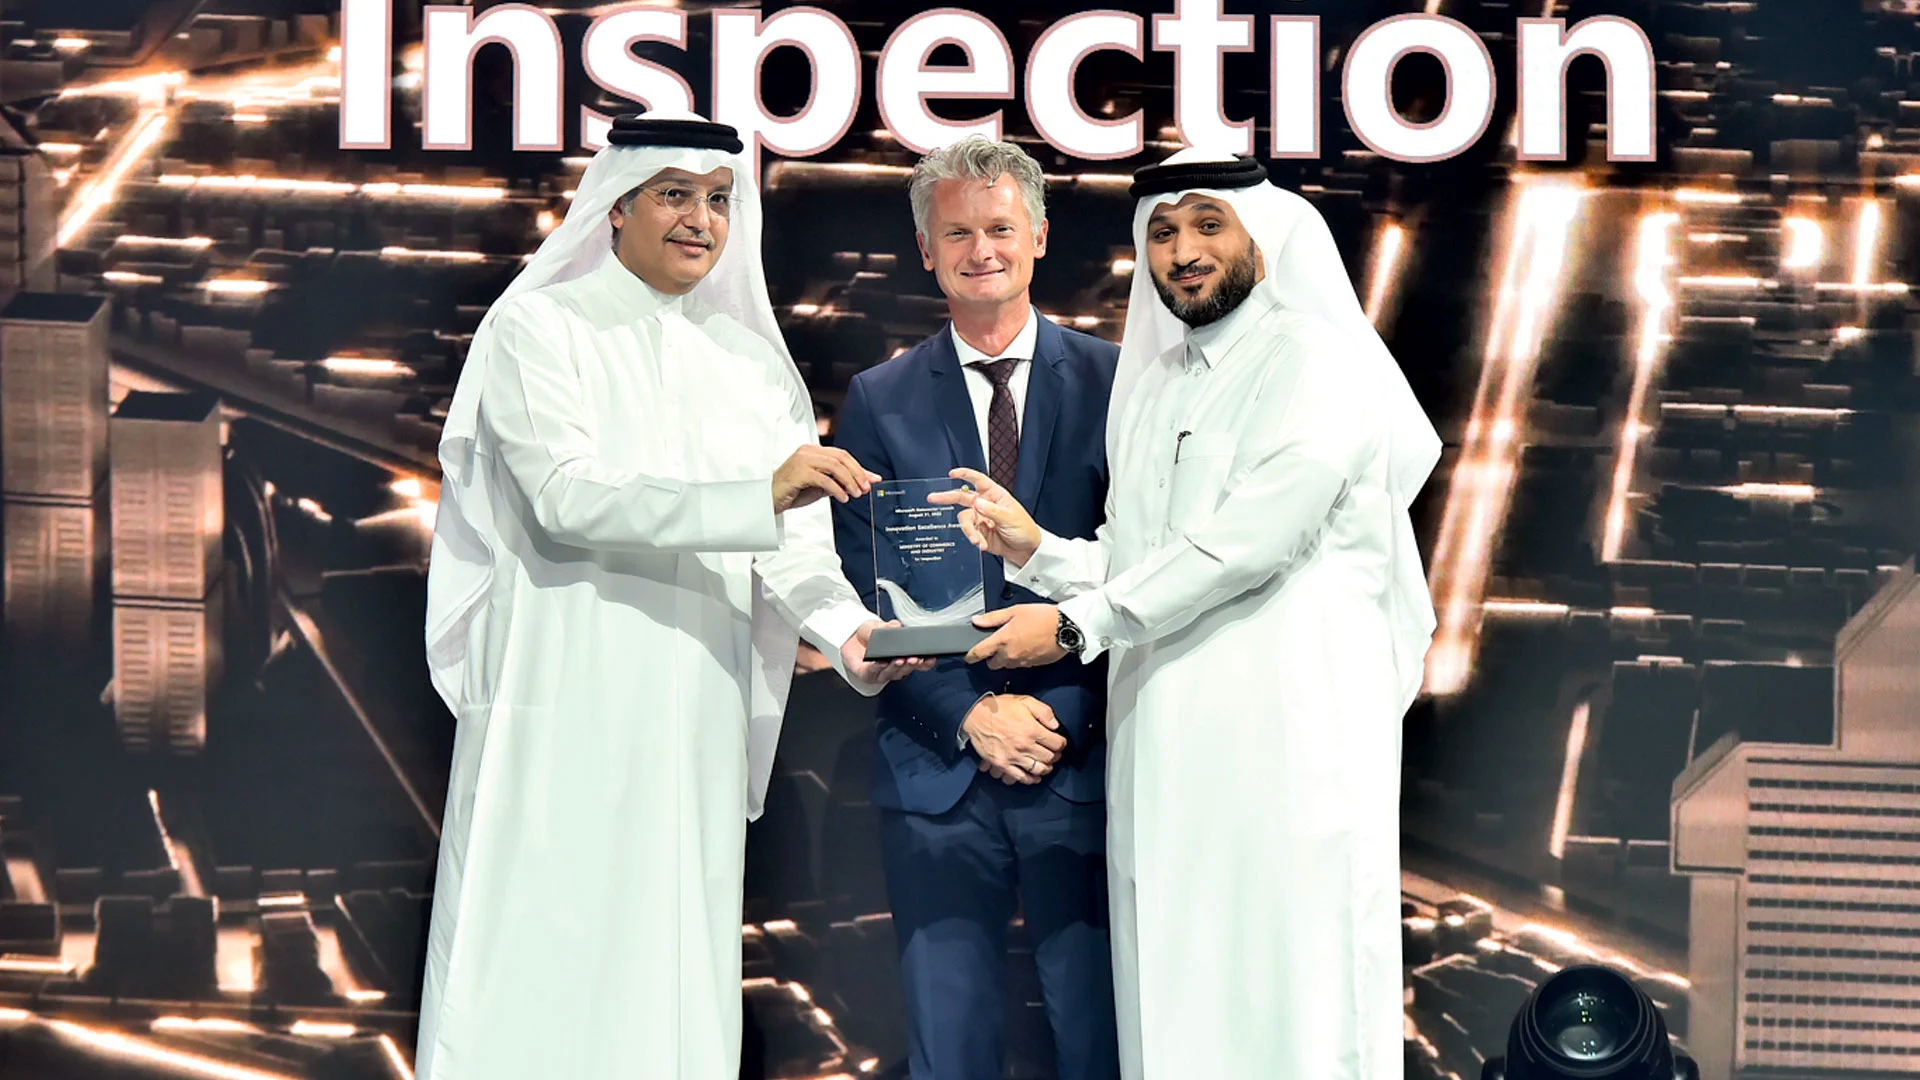 MoCI Wins Excellence Award on E-Inspection System